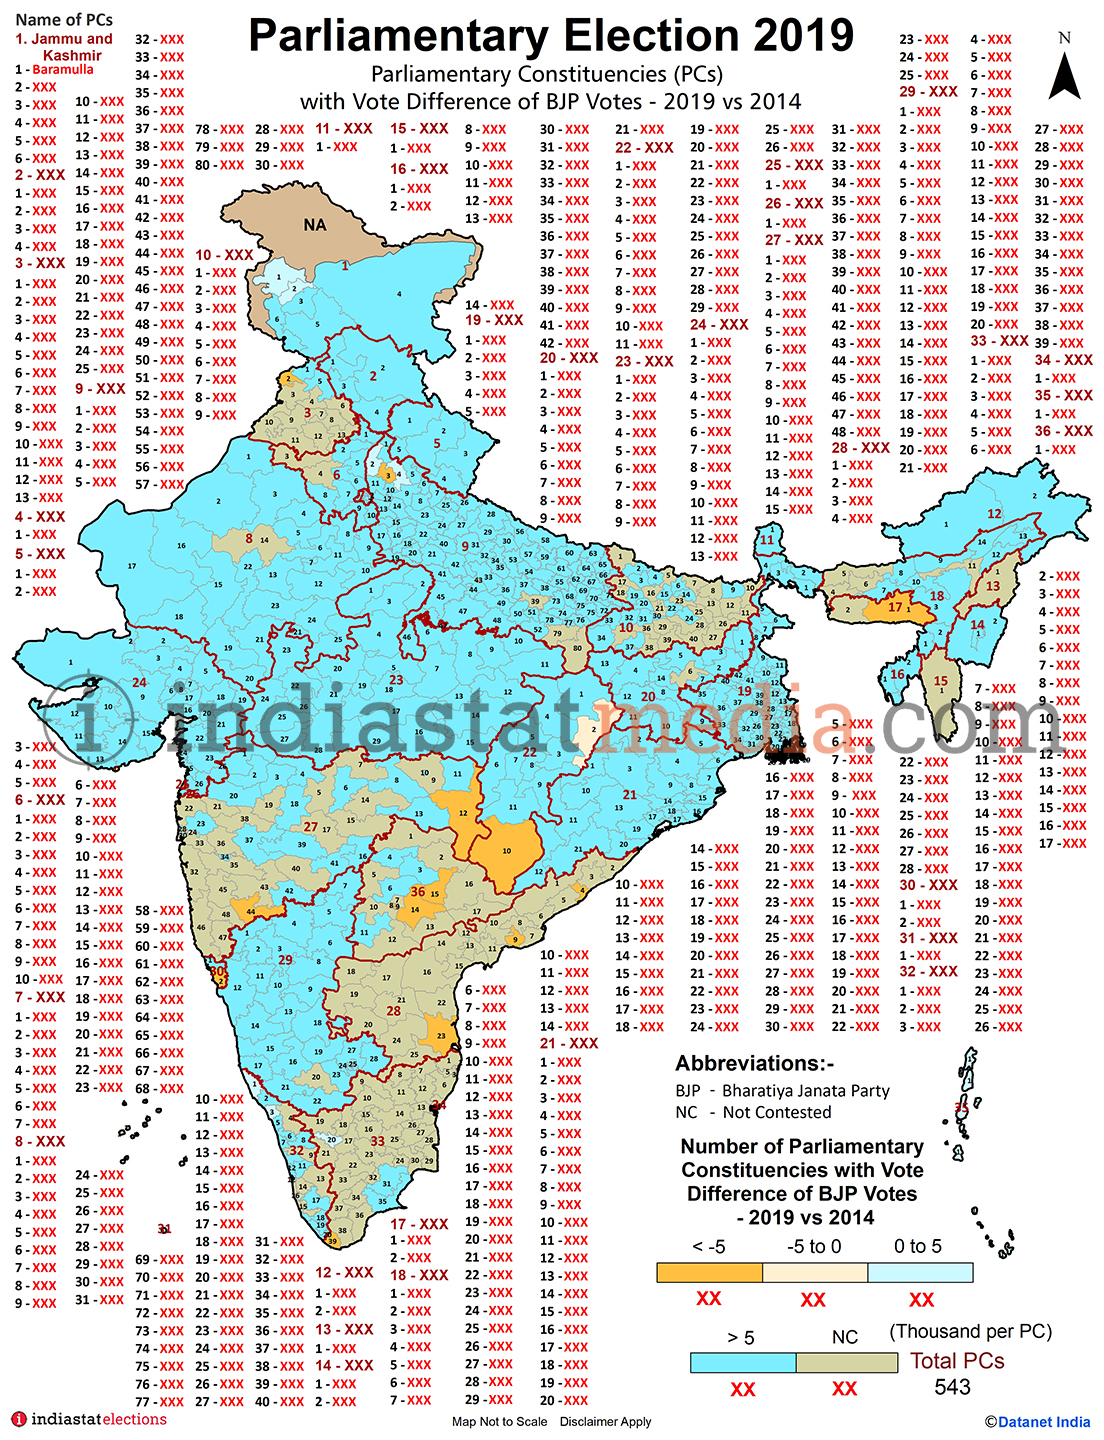 Parliamentary Constituencies with Vote Difference of BJP Votes in India (Parliamentary Elections - 2014 & 2019)